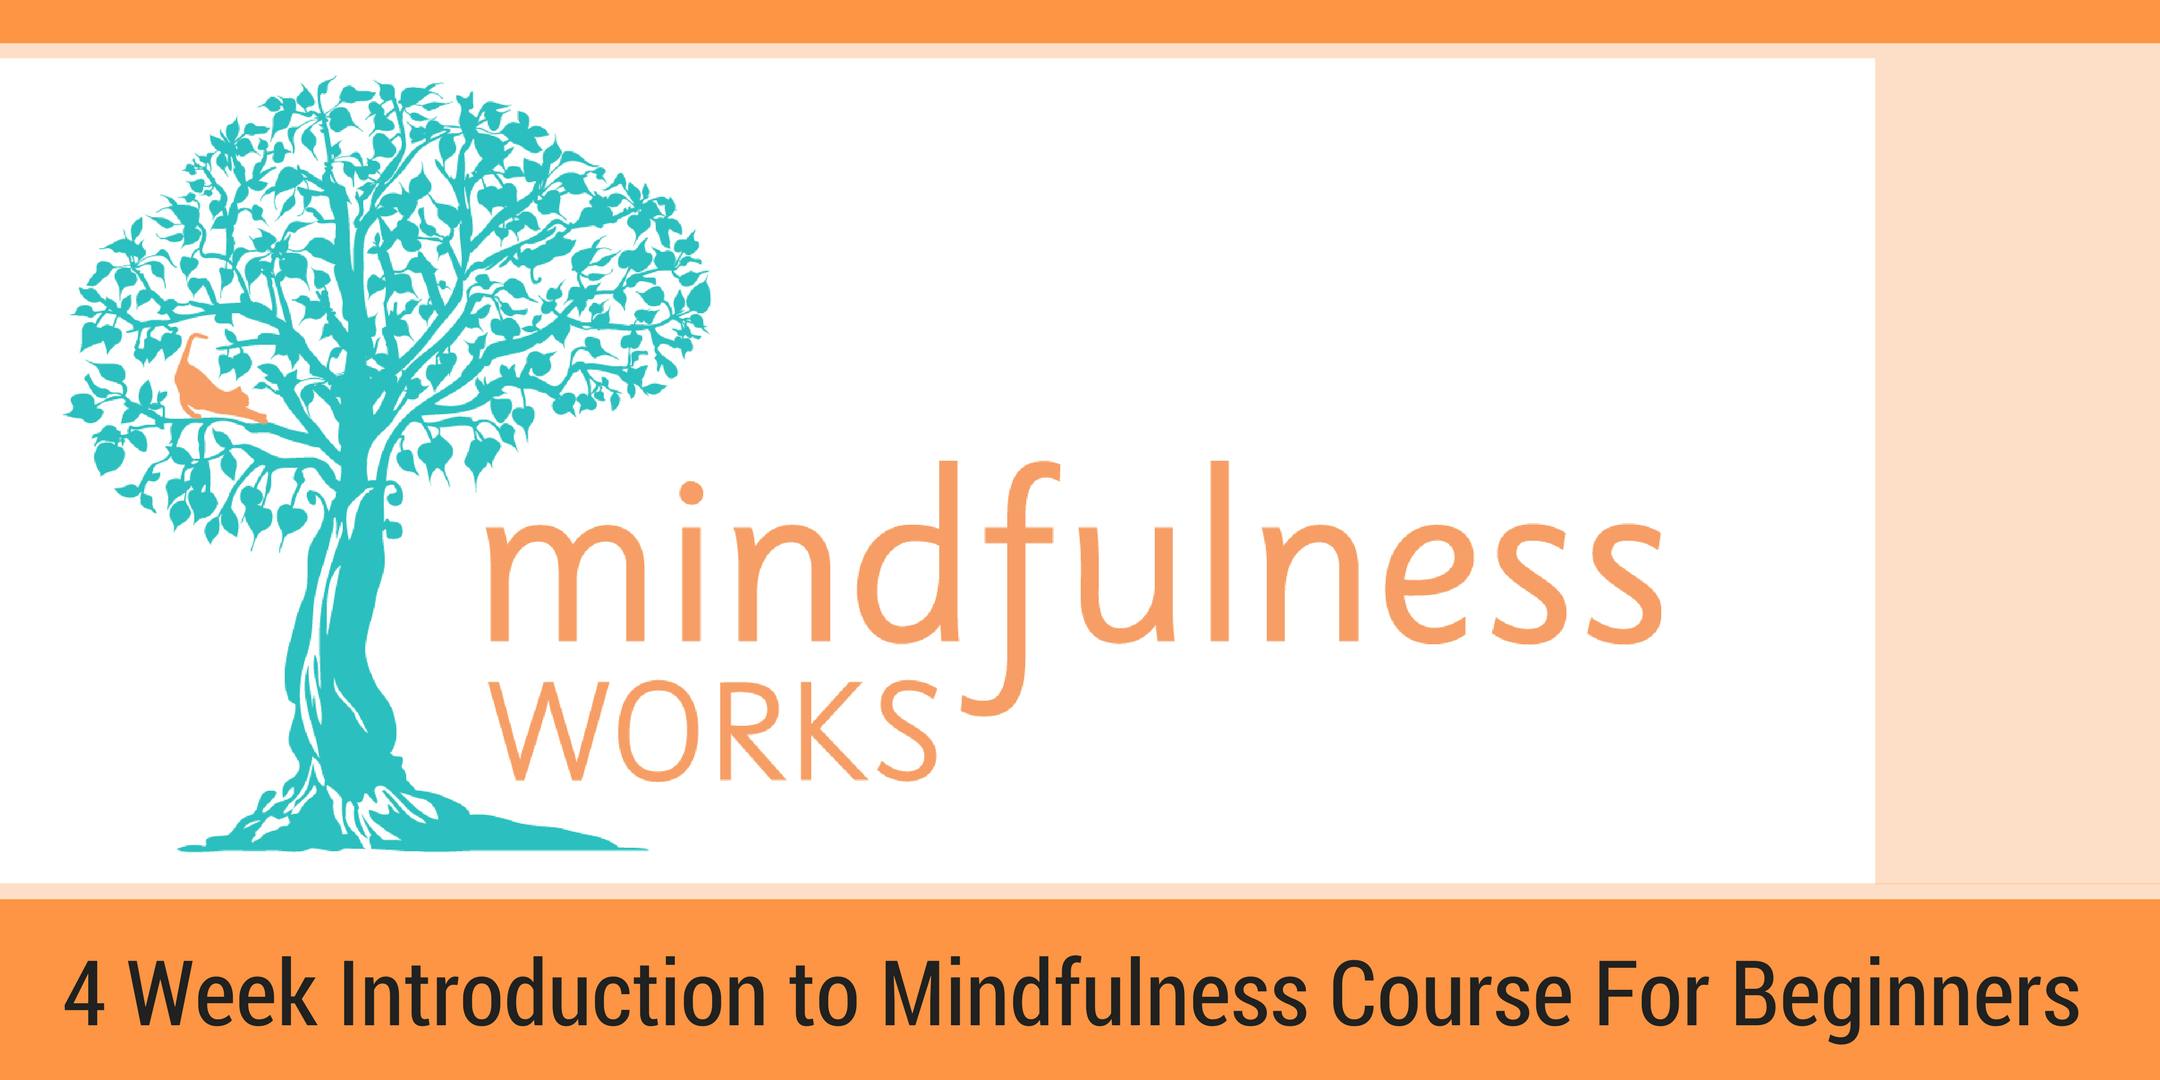 Christchurch (Fendalton) – Intro to Mindfulness and Meditation 4 Week course. 